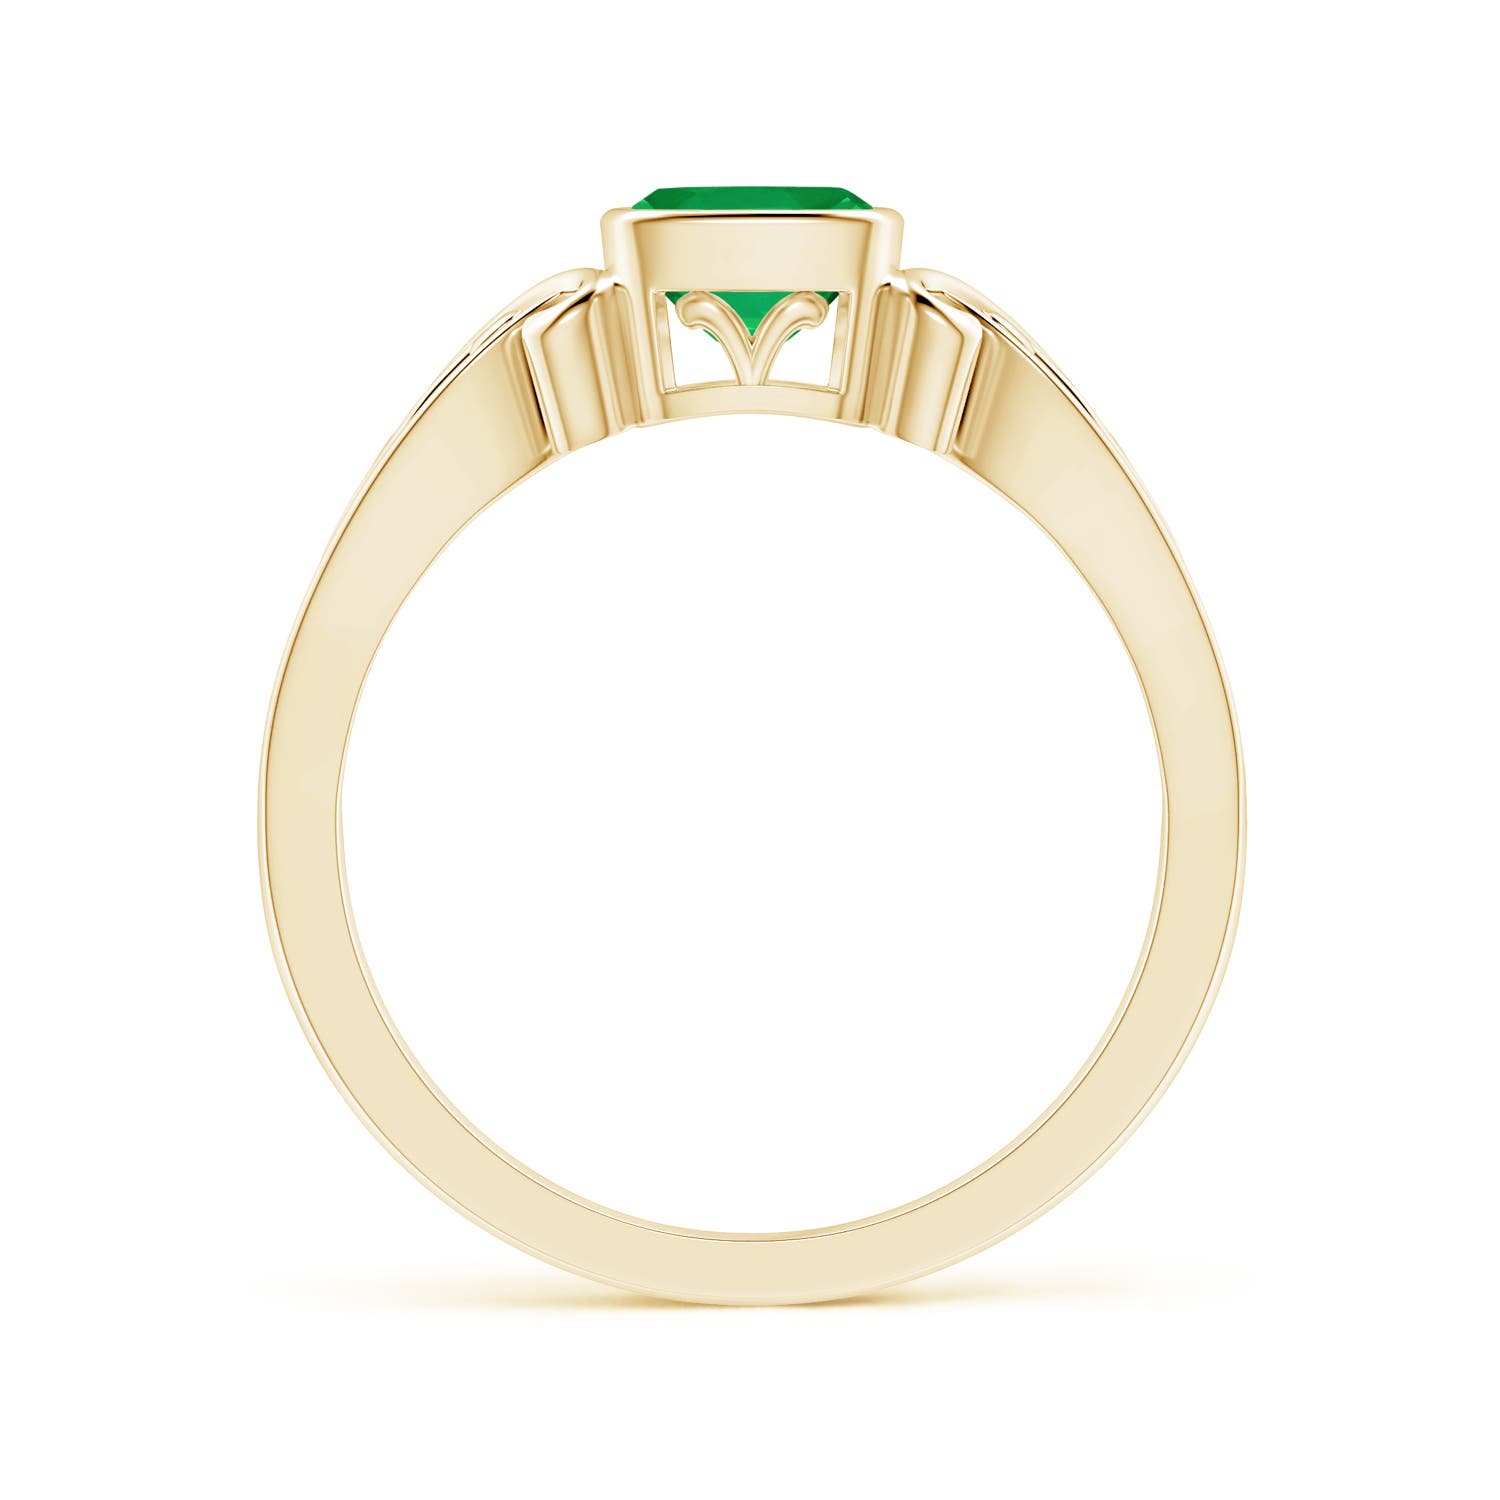 AA - Emerald / 0.55 CT / 14 KT Yellow Gold